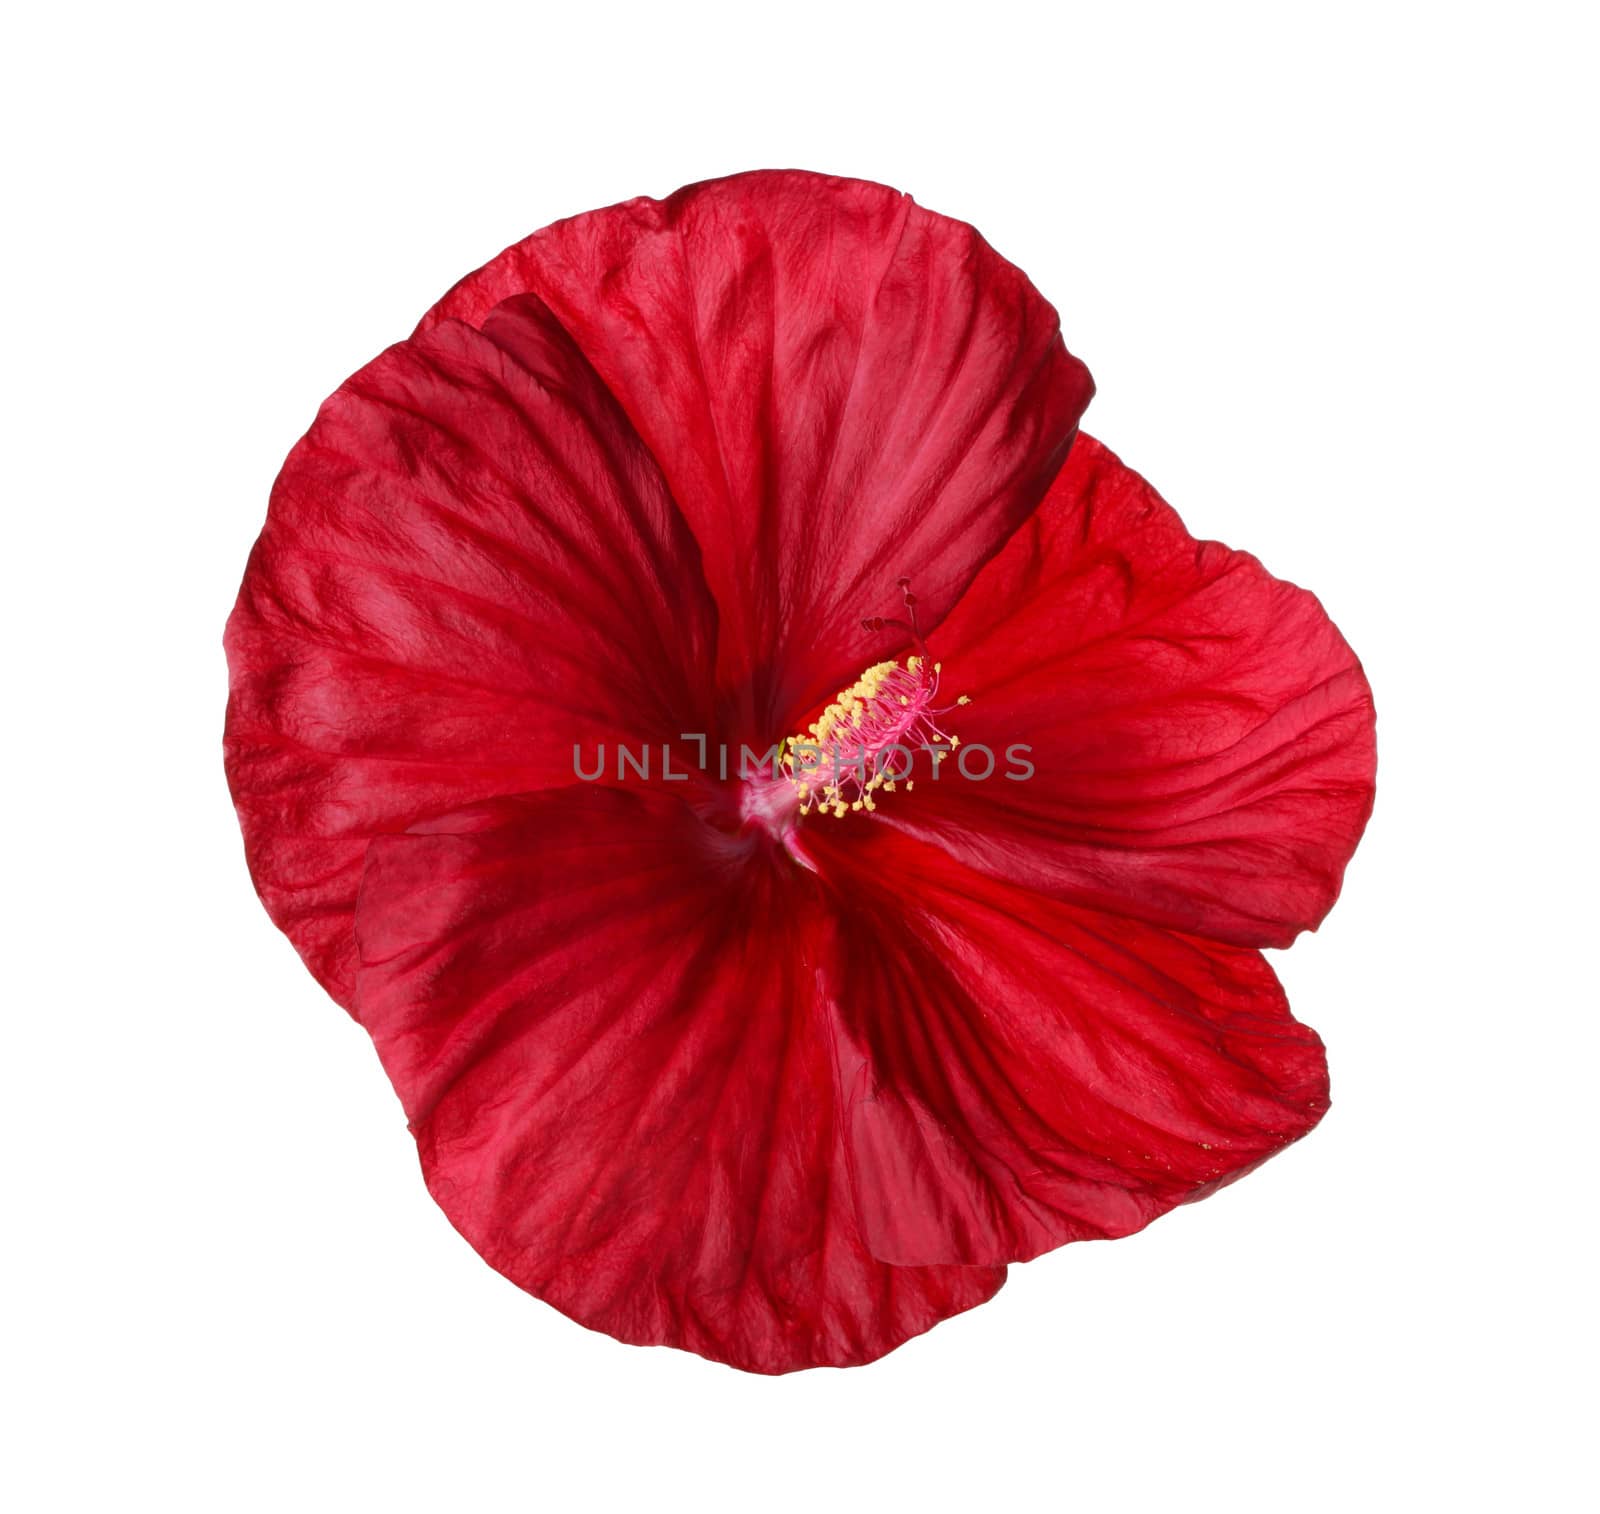 Isolated flower of a deep red hibiscus by sgoodwin4813